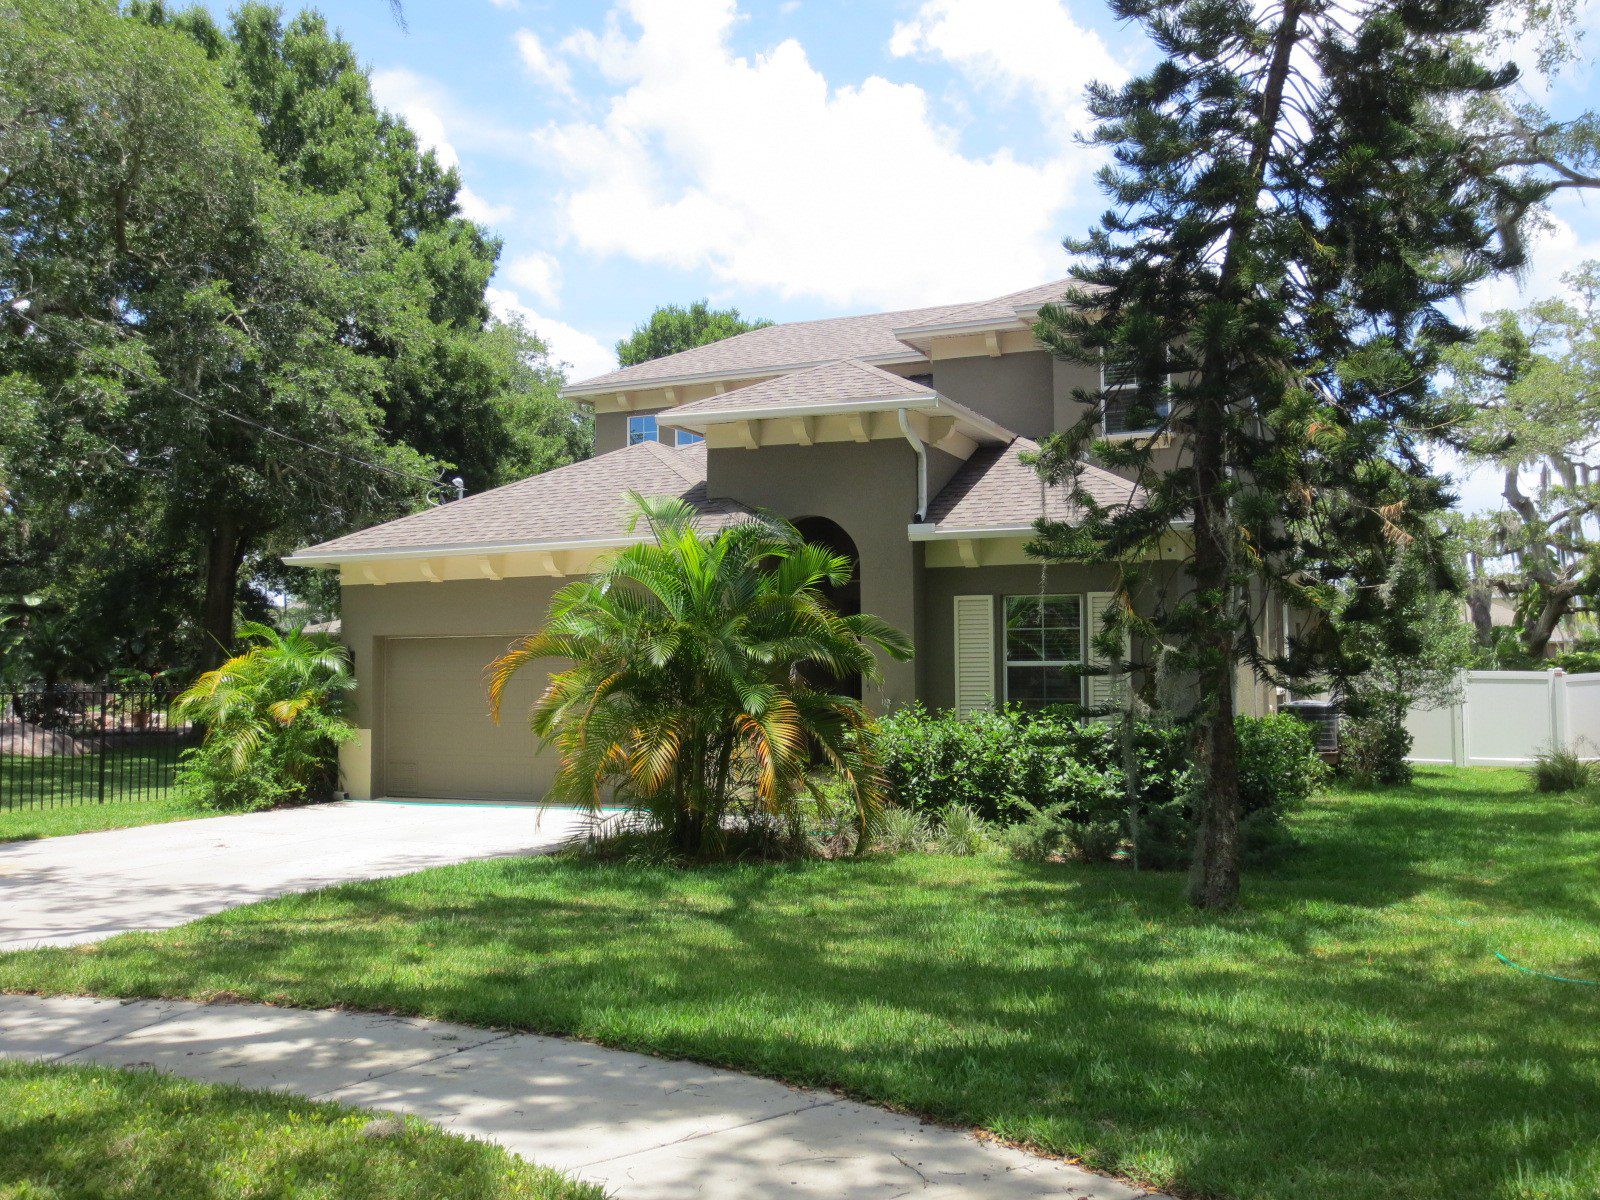 A dark gray house on a green lawn with trees, near where Hoffman Realty offers Tampa leasing service